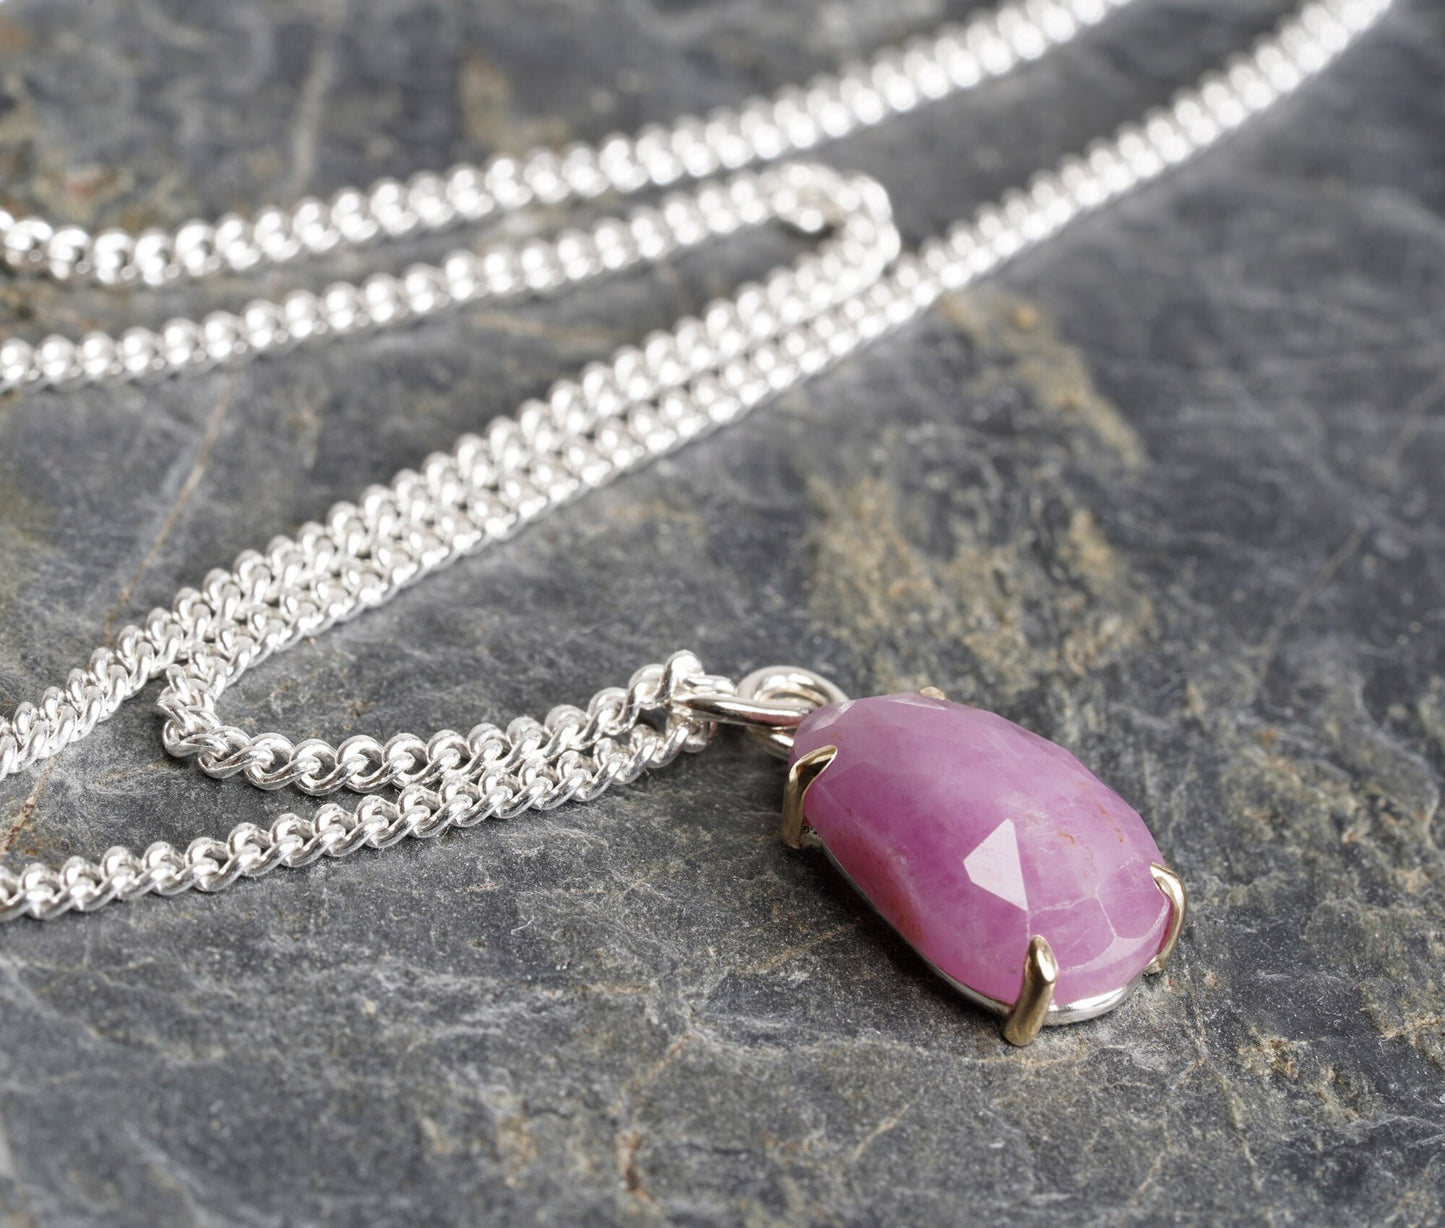 Oval Sapphire Necklace in Orchid Pink, 3.45ct Sapphire Necklace